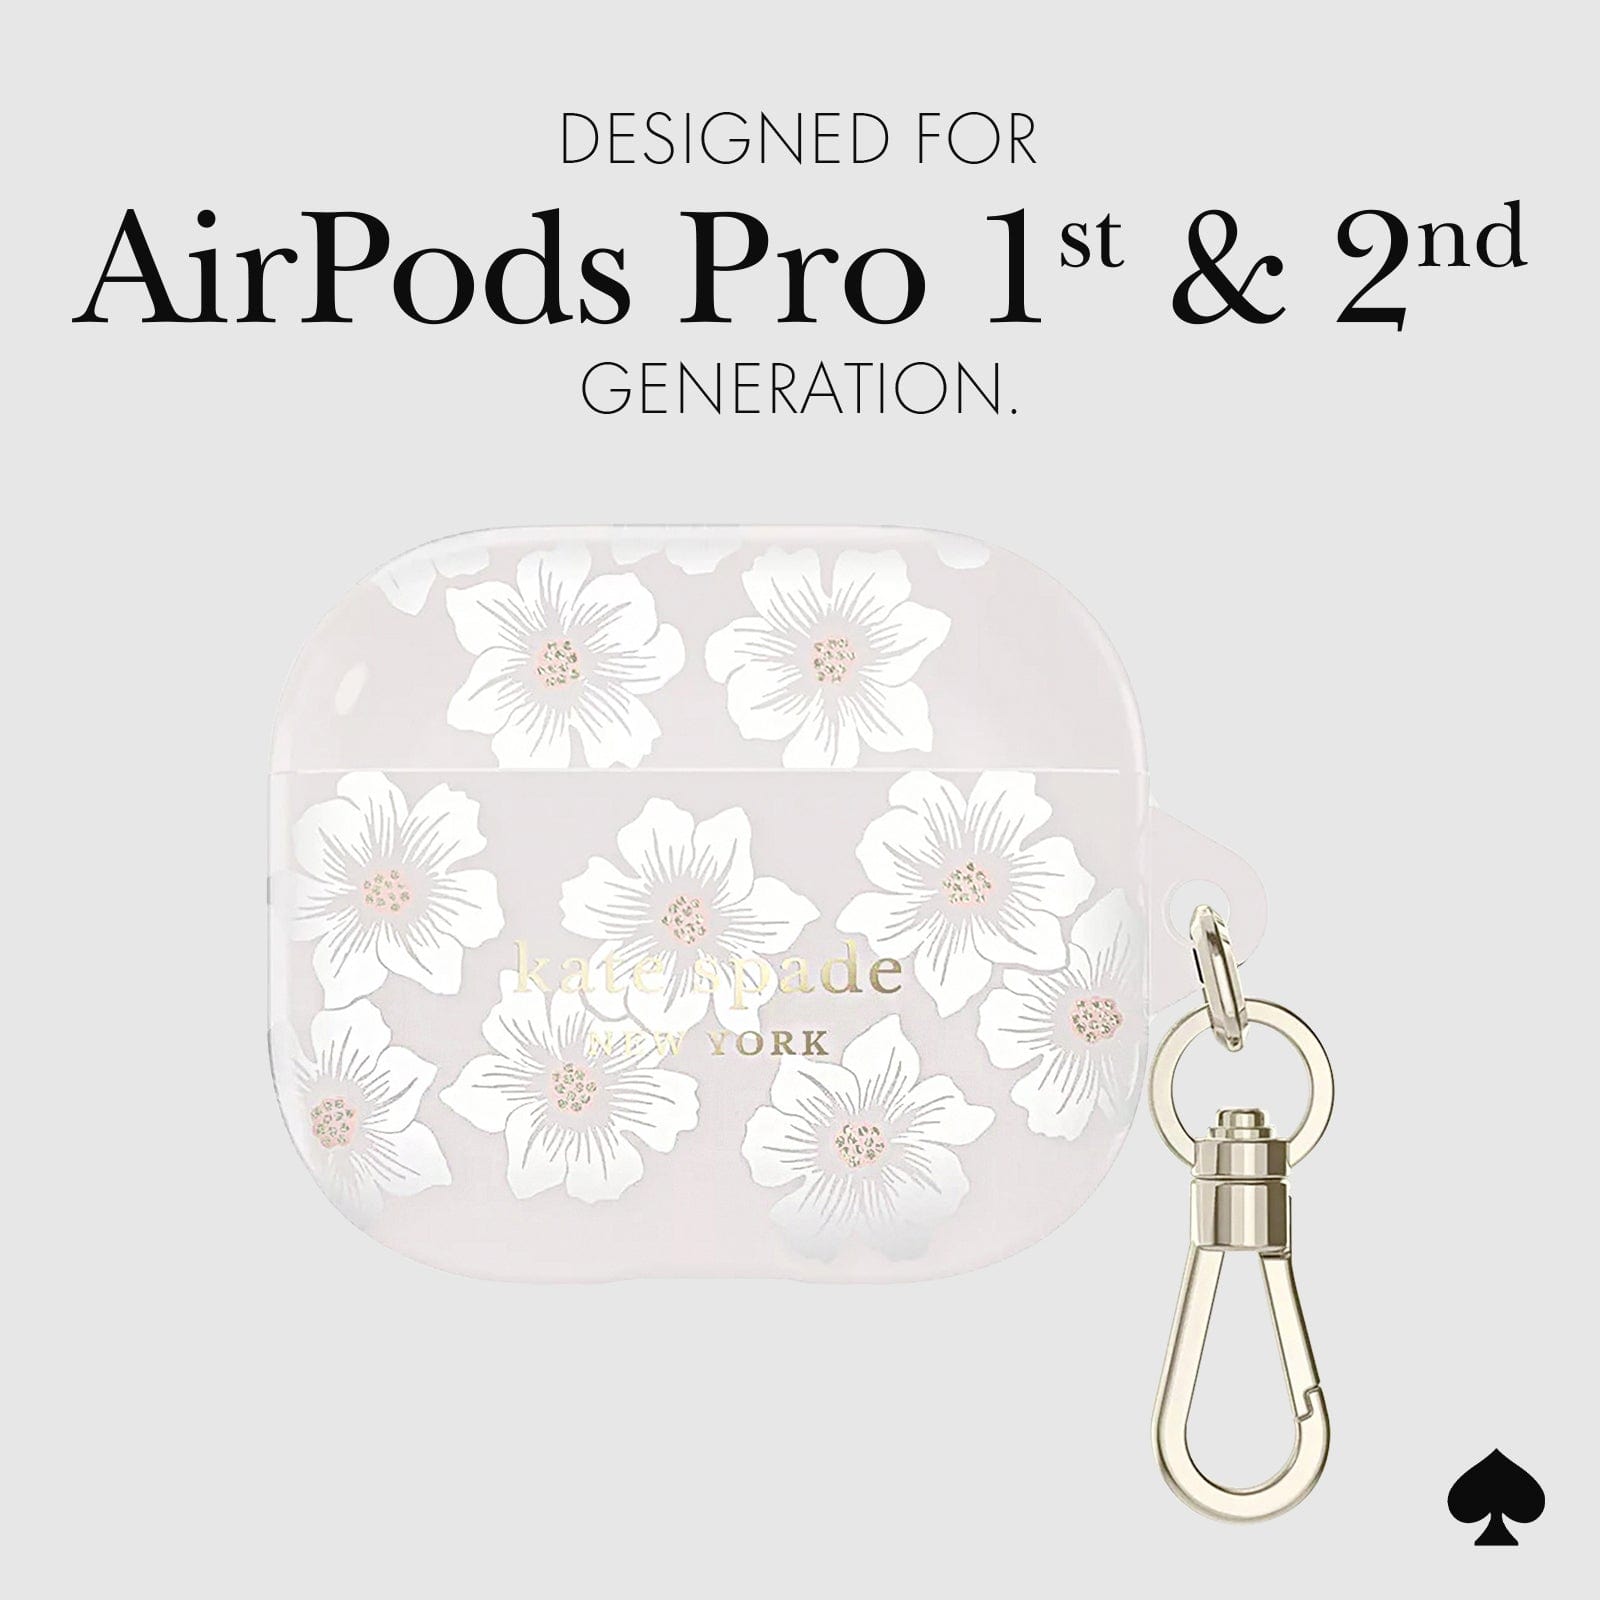 DESIGNED FOR AIRPODS PRO 1ST AND 2ND GEN